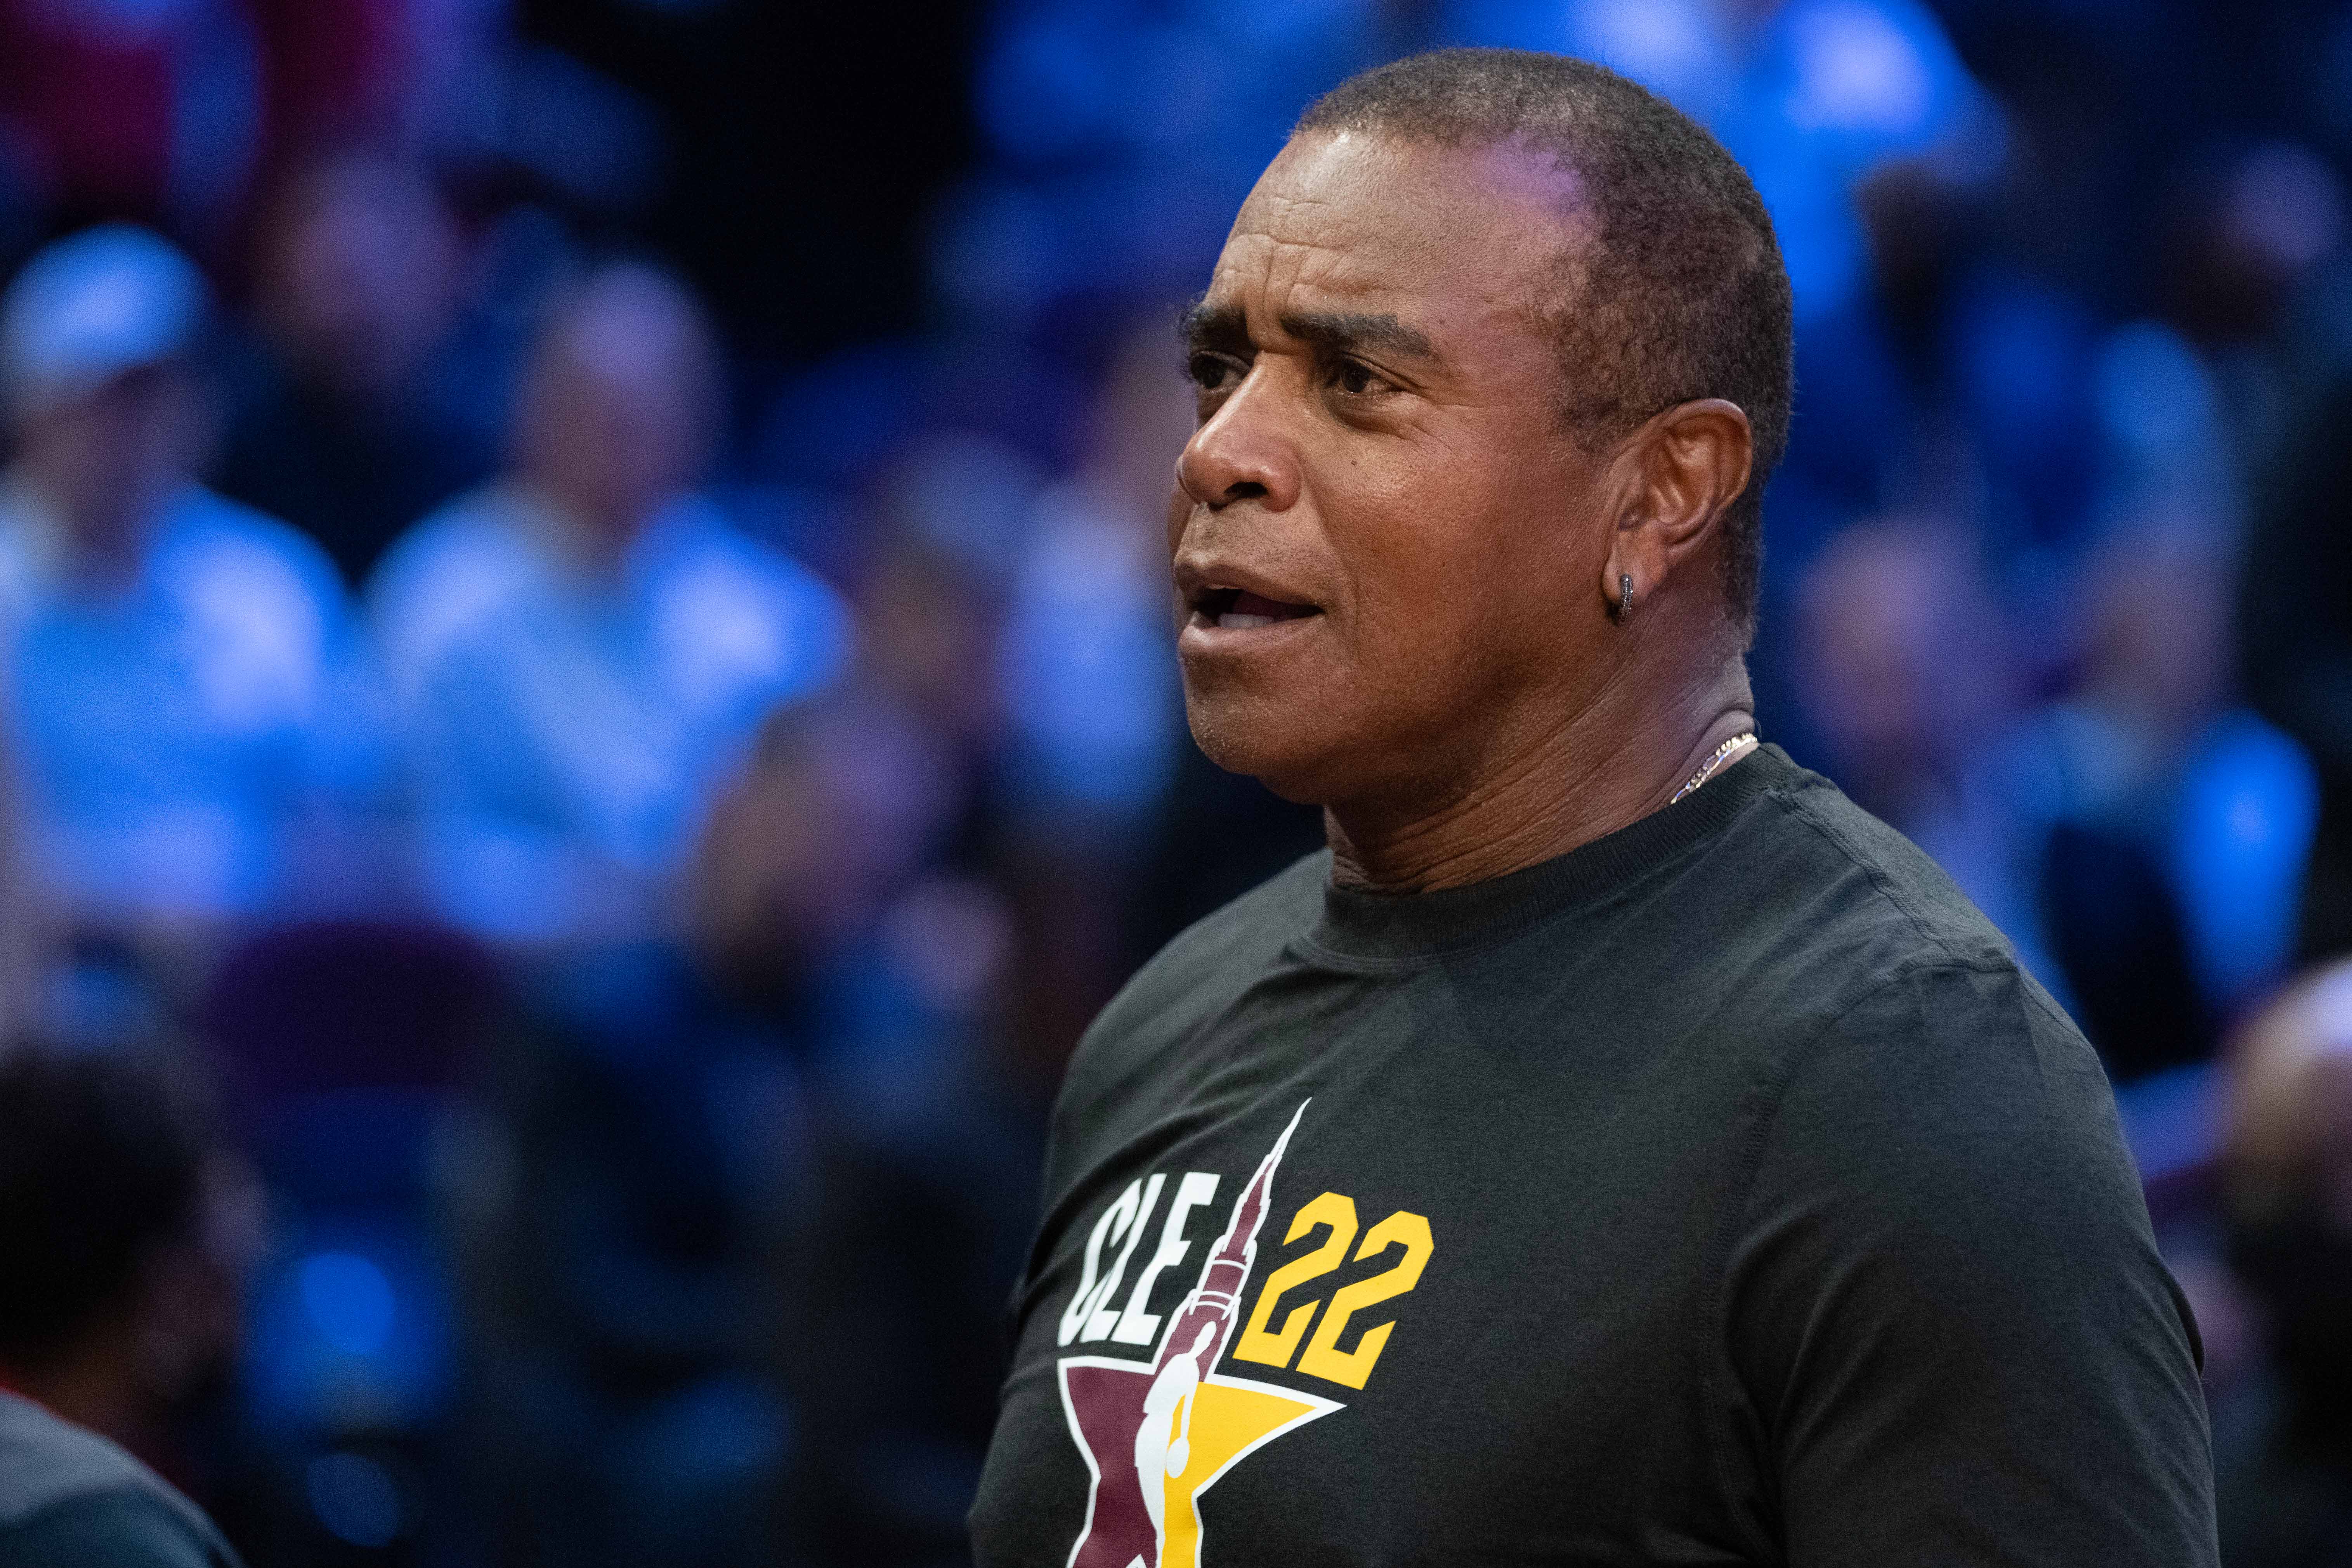 Ahmad Rashad Q&A: ‘Basketball today is as good as it’s ever been’